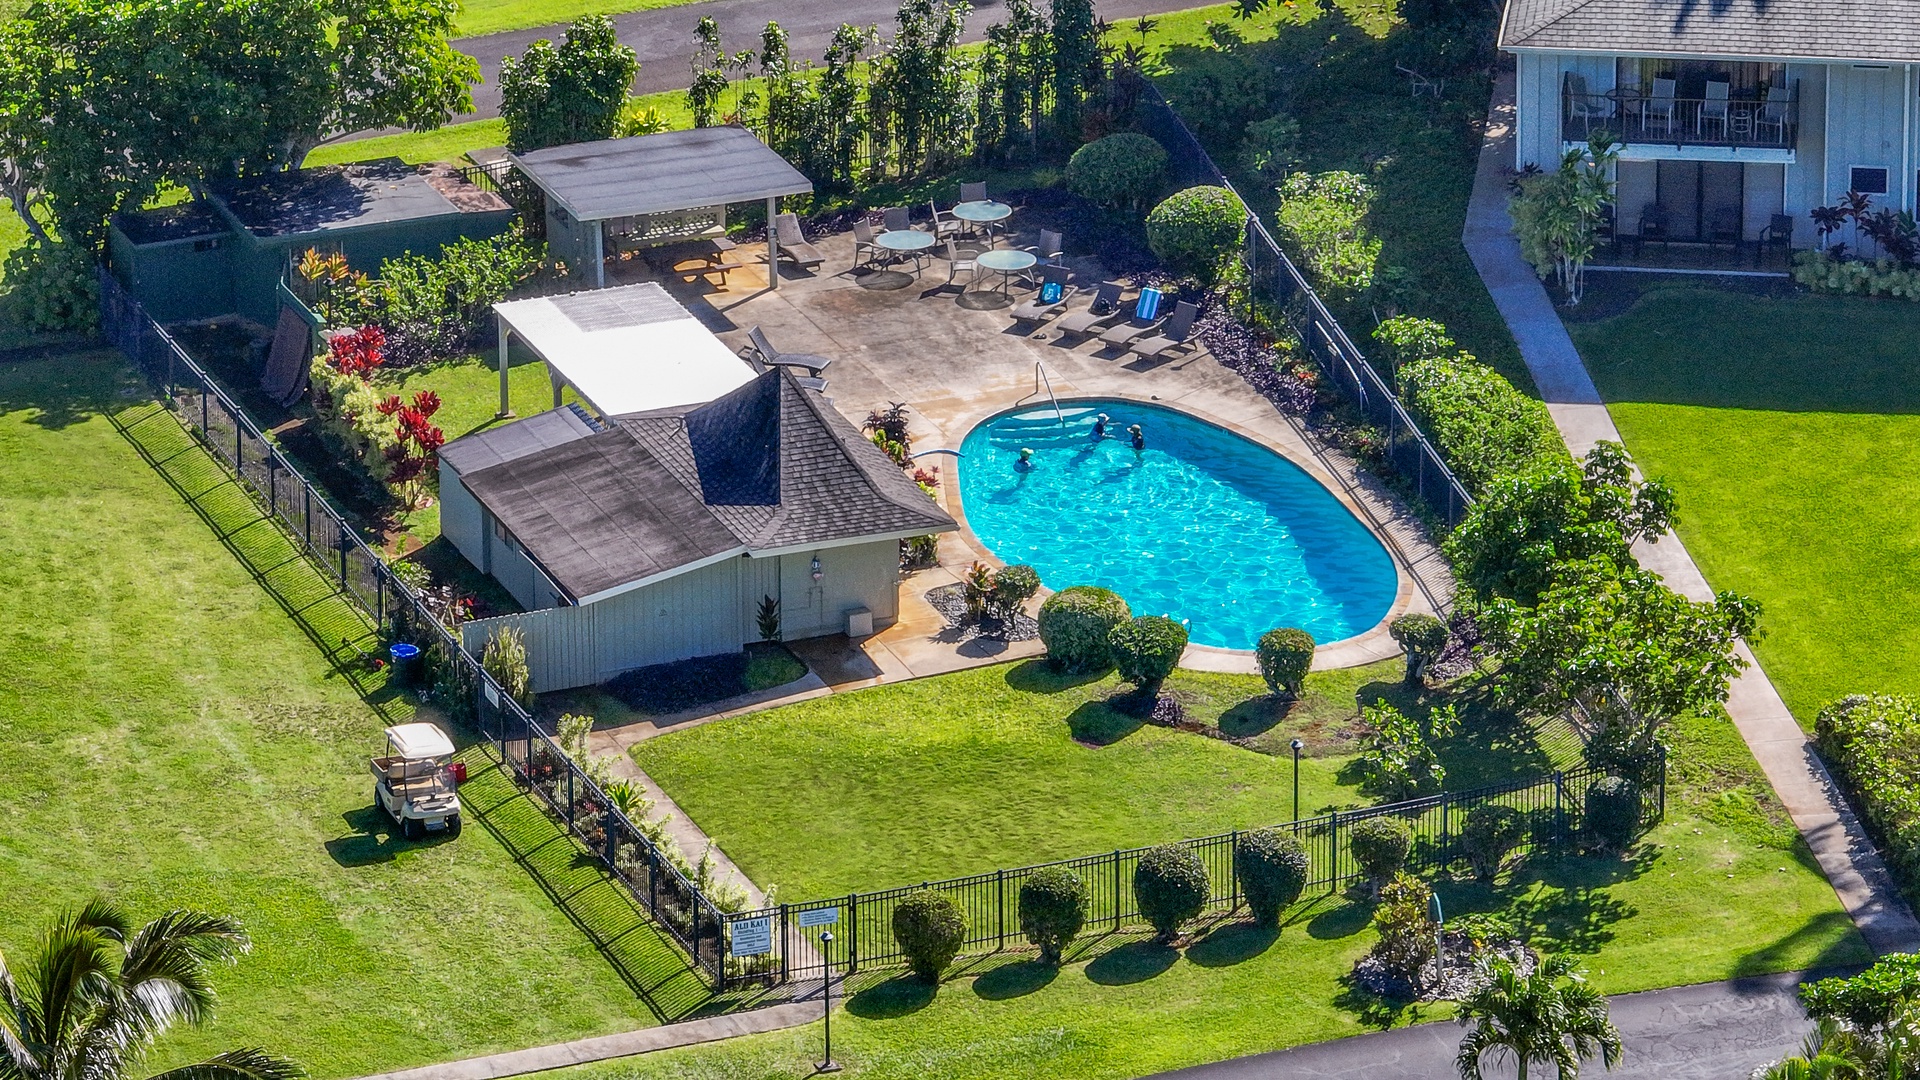 Princeville Vacation Rentals, Alii Kai 7201 - Aerial shot of the community pool.